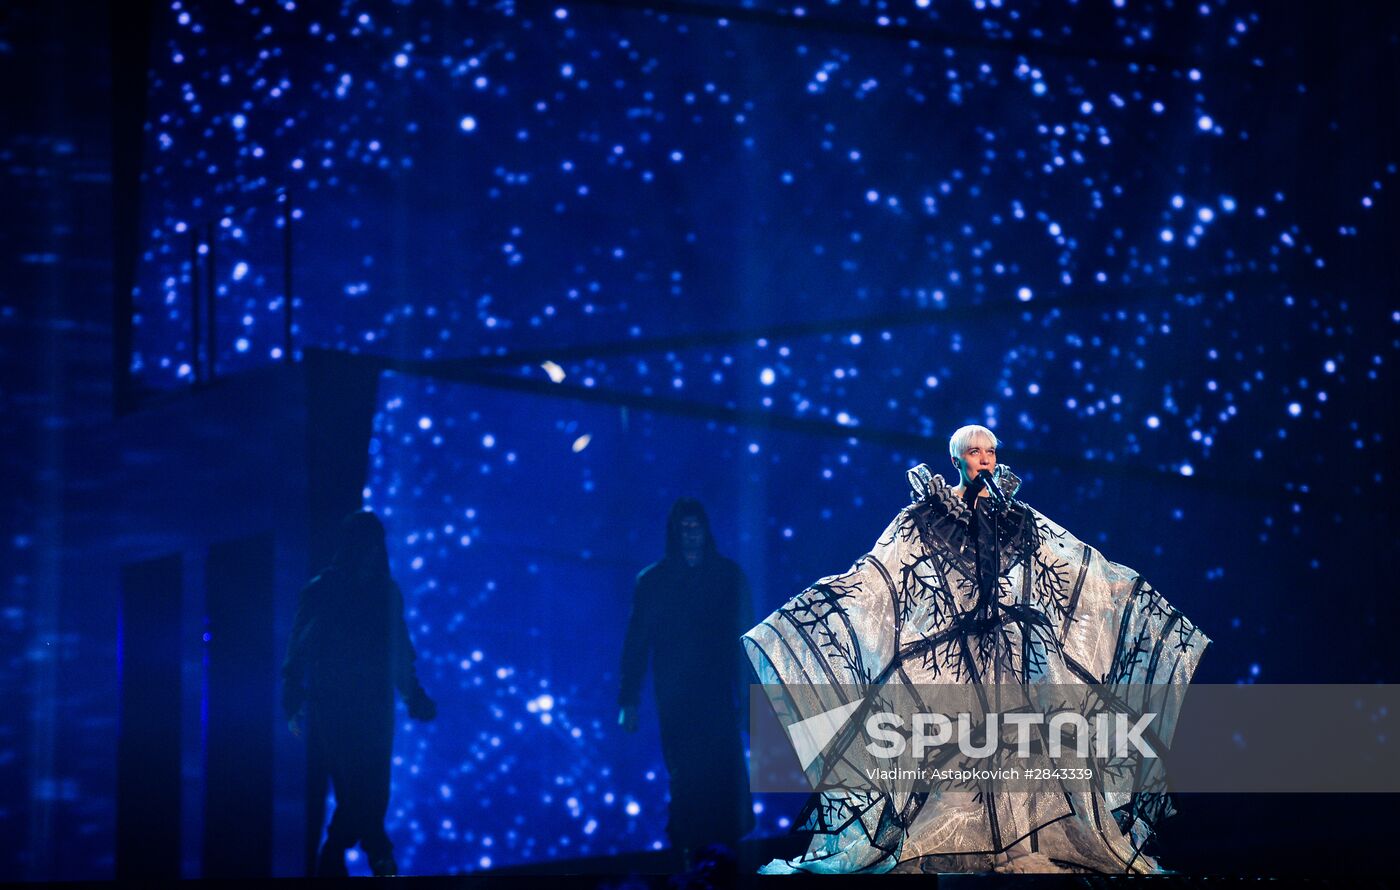 Dress rehearsal of the first Eurovision Song Contest semifinals